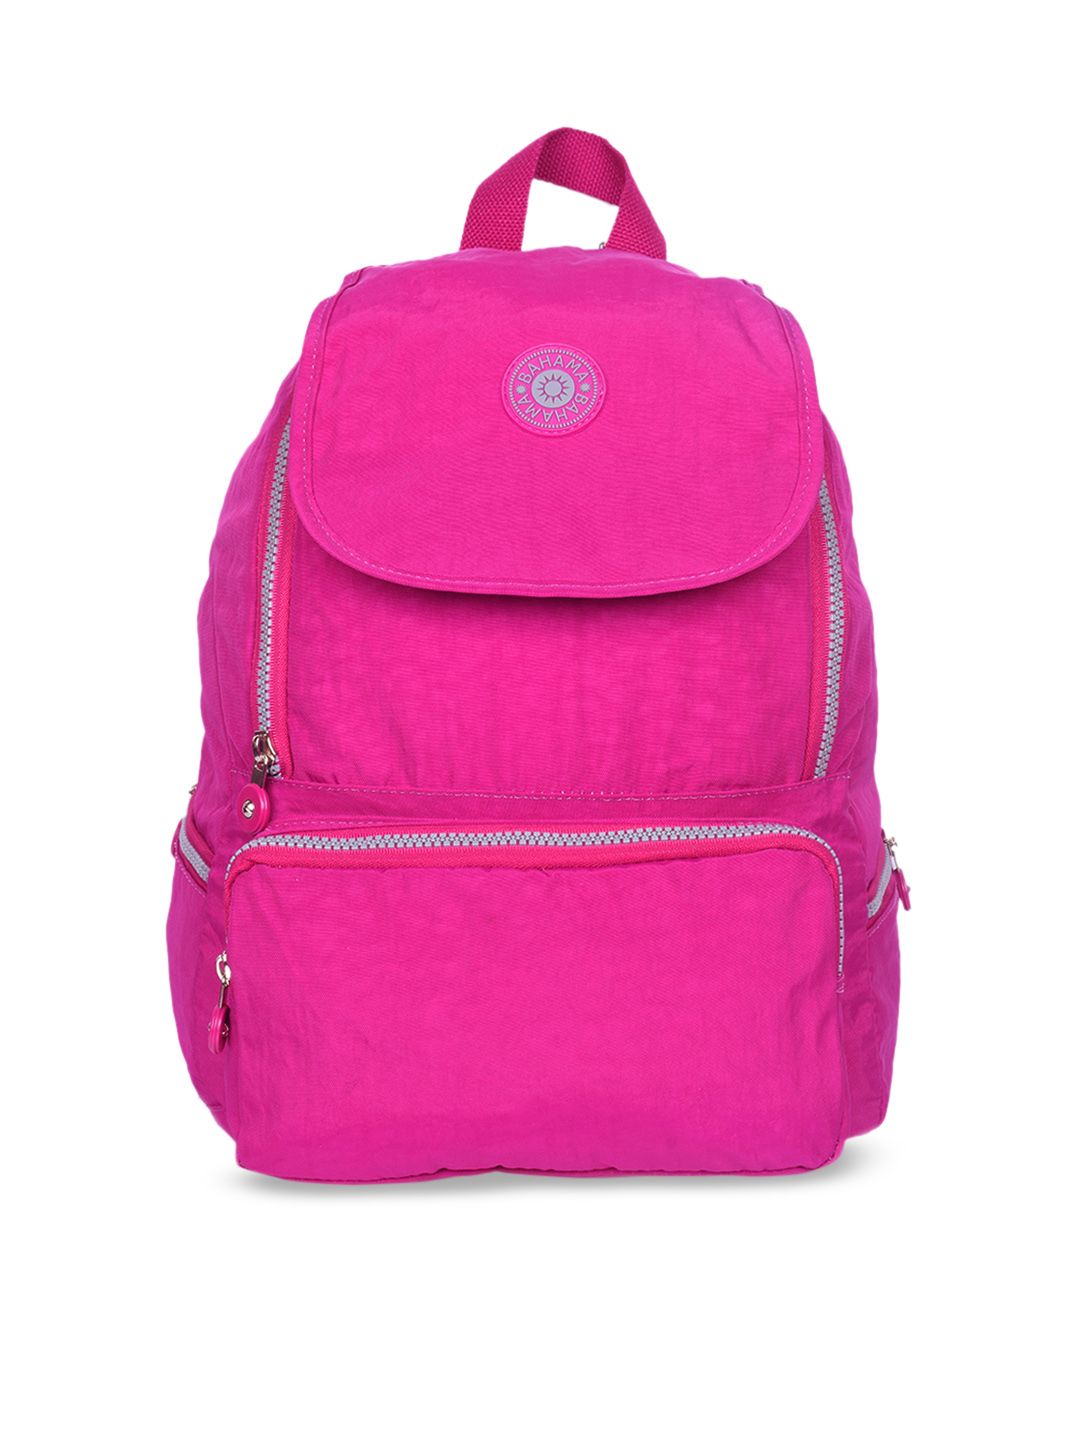 BAHAMA Crinkle Unisex Pink Solid Backpack Price in India